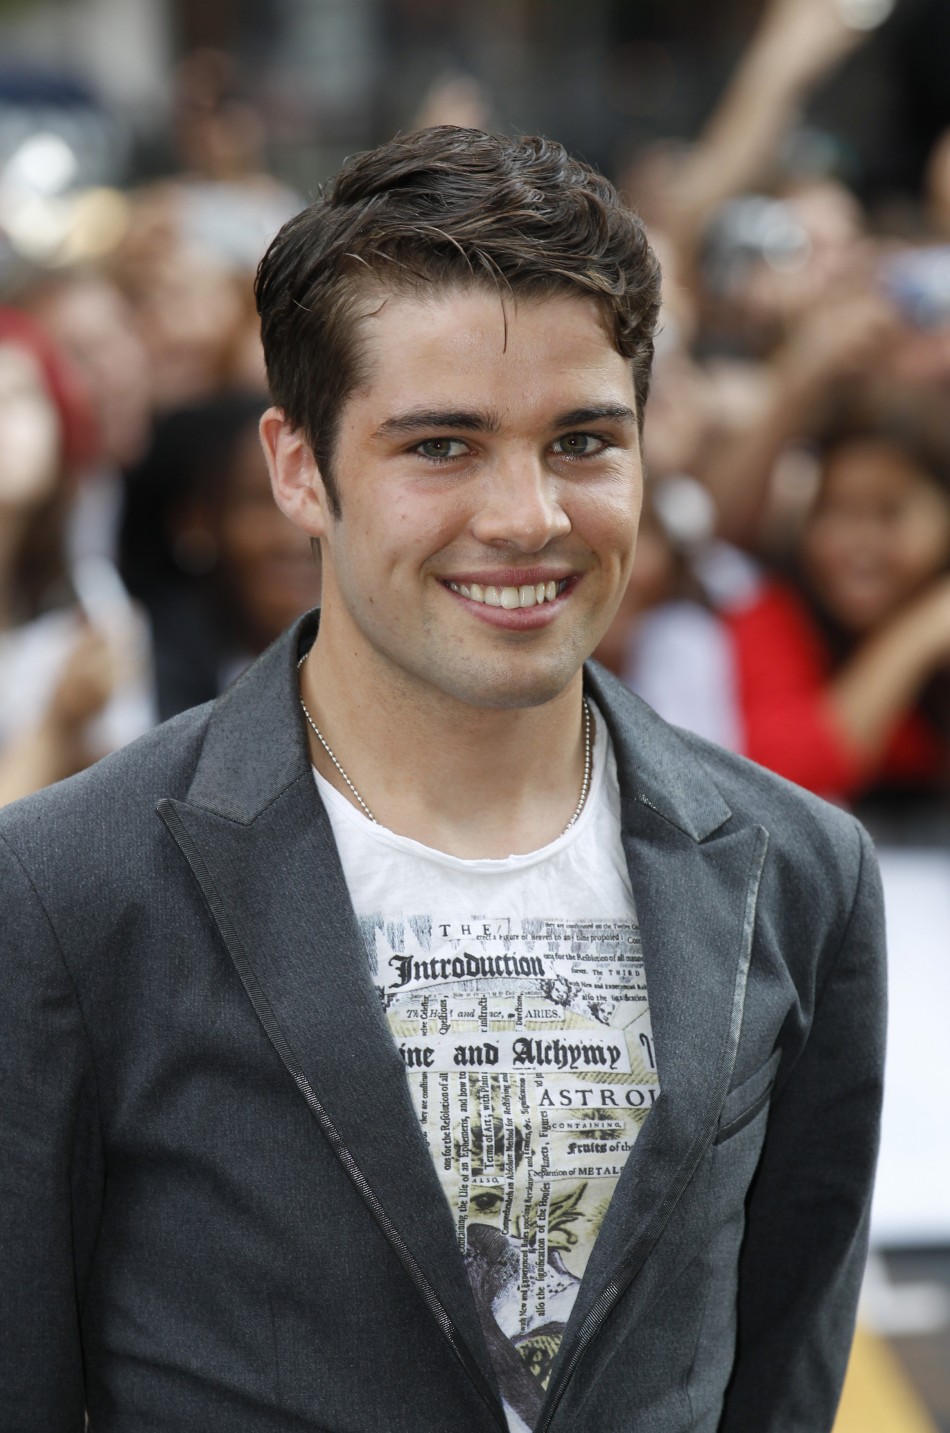 Joe McElderry, who won the X Factor in 2009 and Popstar to Opera Star earlier this year, will perform To Where You Are at Royal Albert Hall.